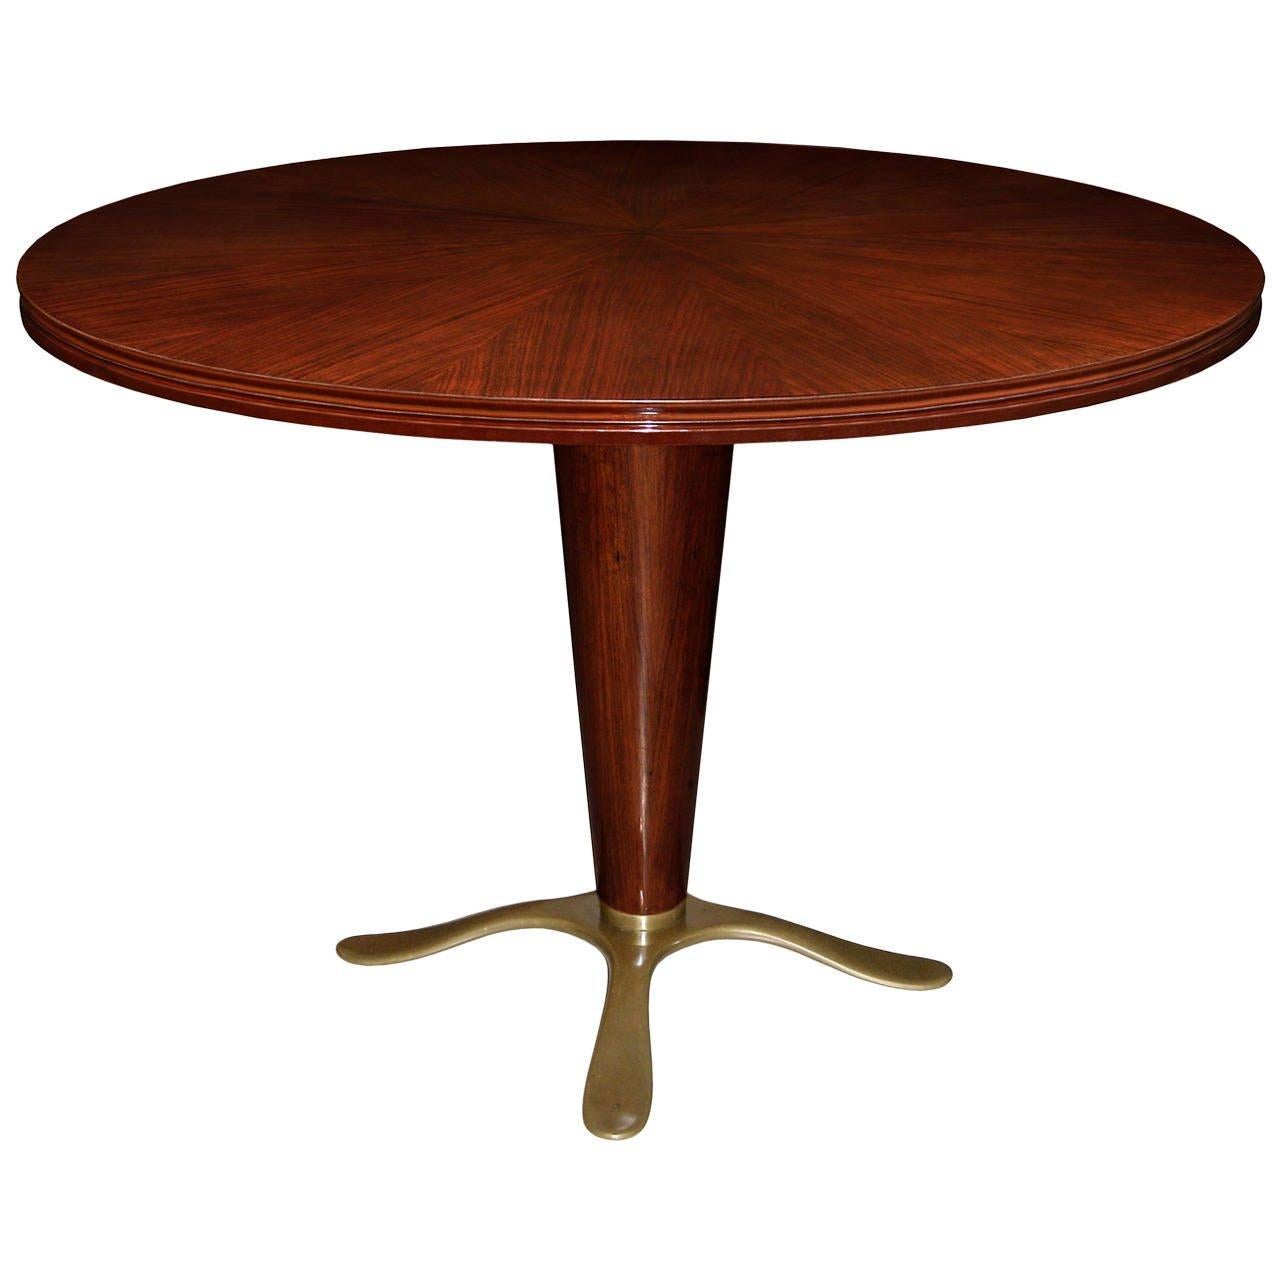 A mahogany pedestal table with starburst top and cast bronze base by Paolo Buffa.

Italian, Circa late 1940's

In Stock.